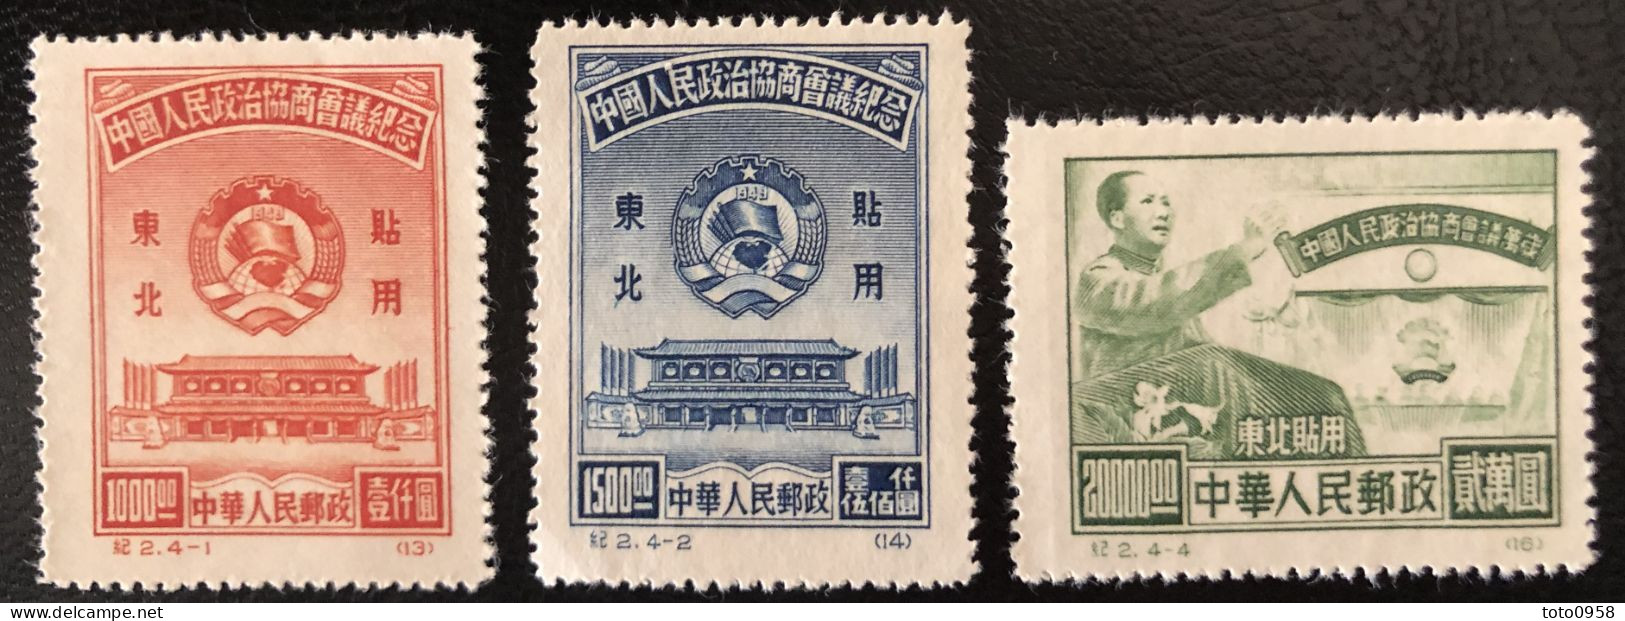 Chine Du N-E 1950 Chinese People's Political Consultative Conference - Unused Stamps